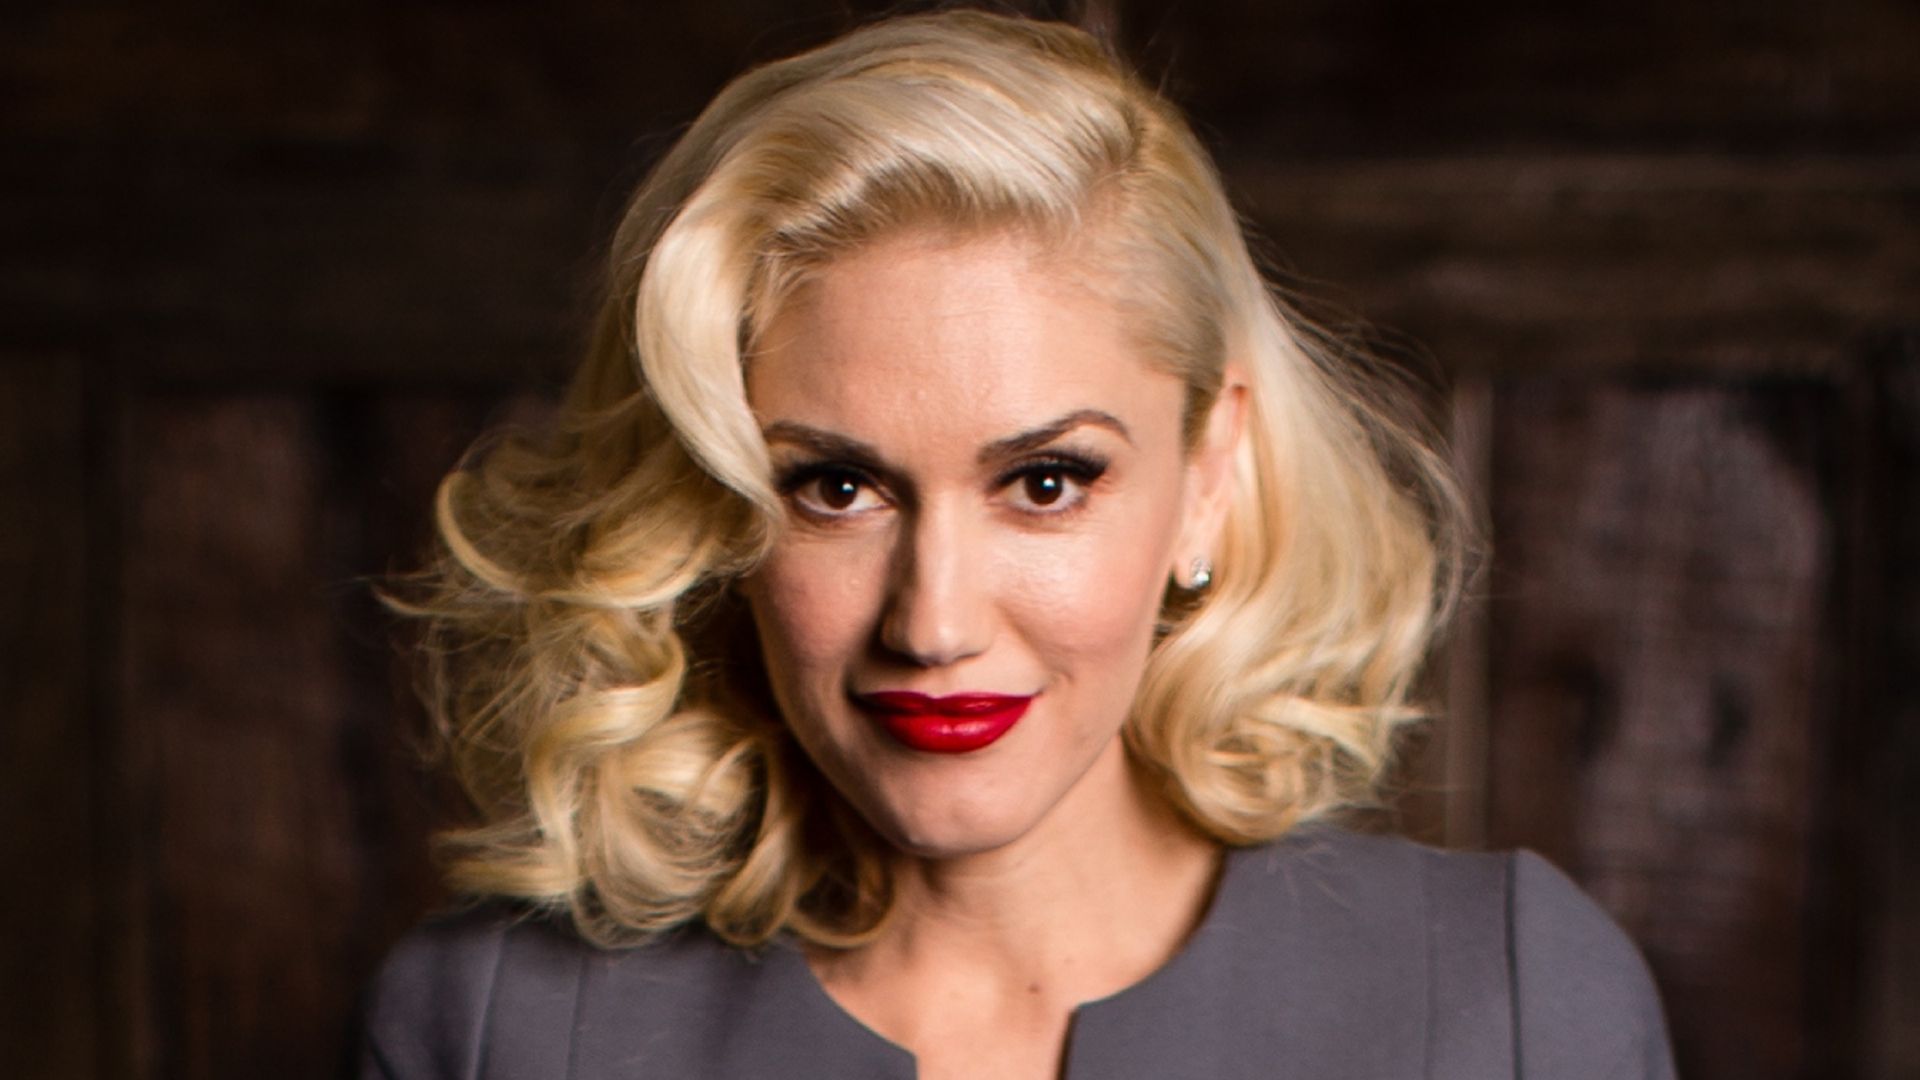 Gwen Stefani's ageless before and after pictures have fans doing a double take